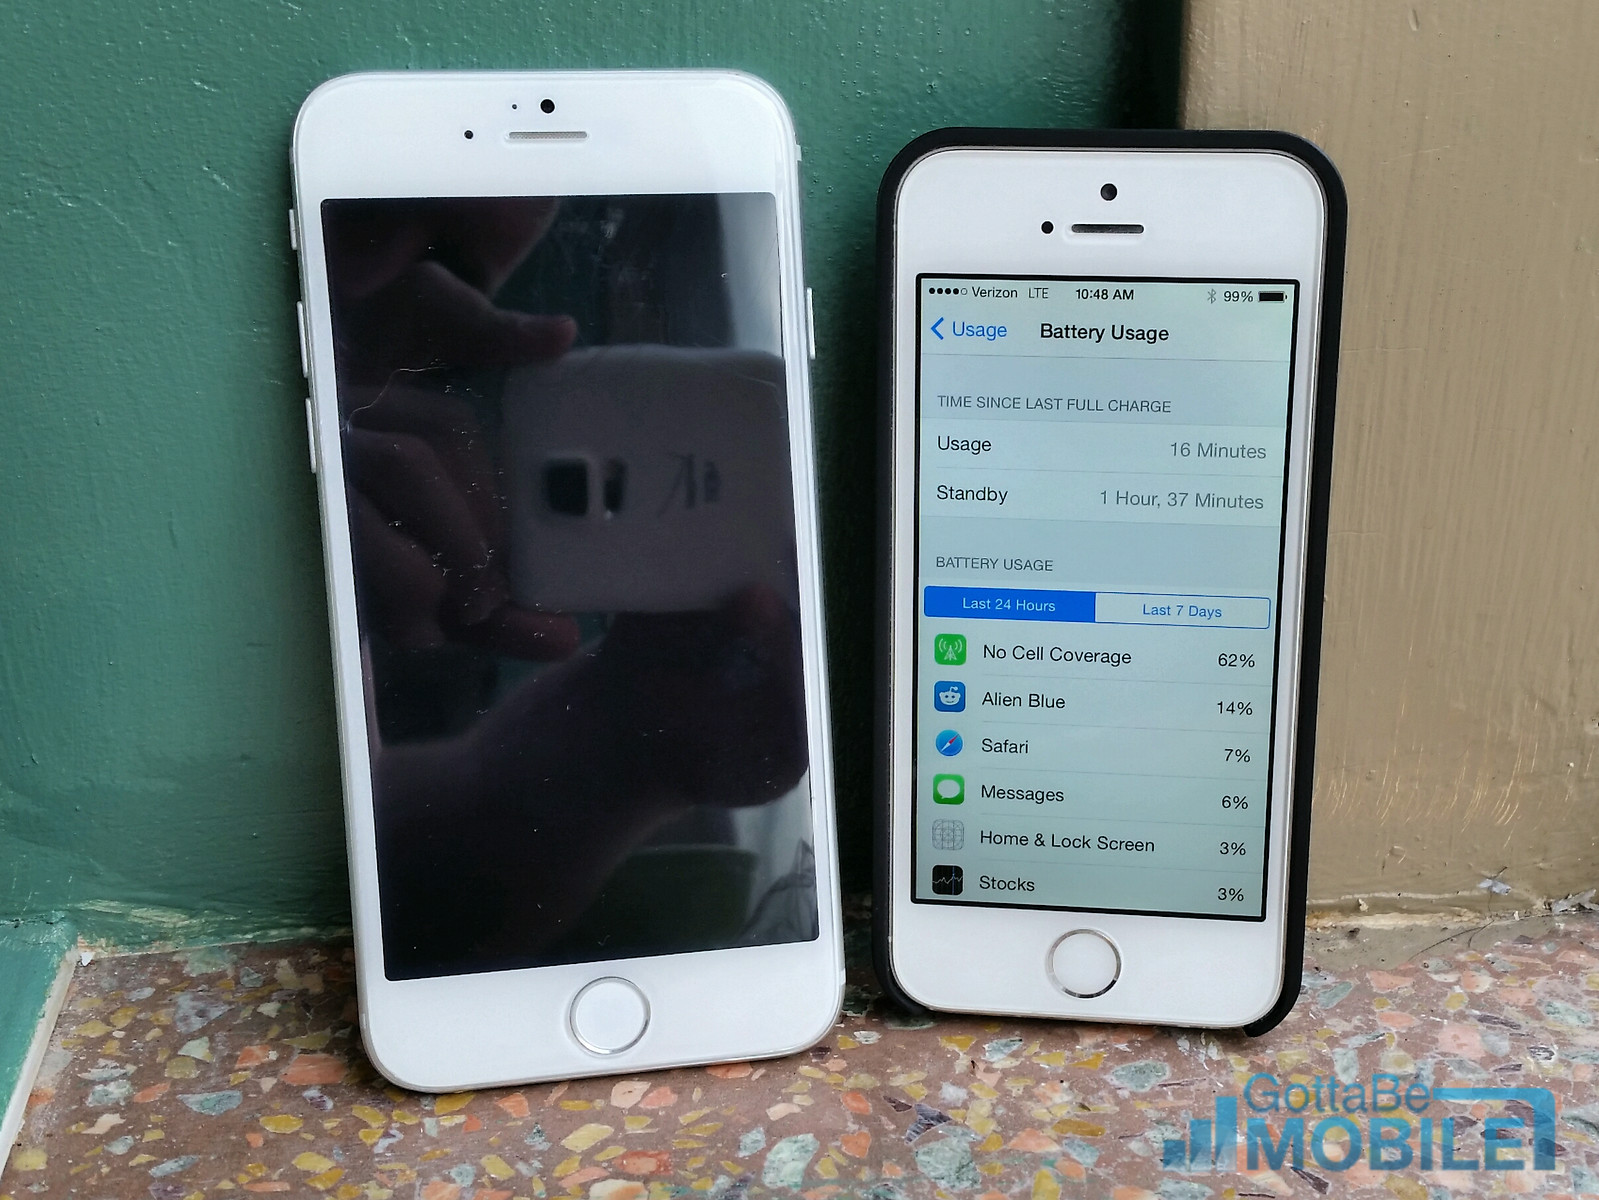 The iOS 8 release is linked to the iPhone 6 release.